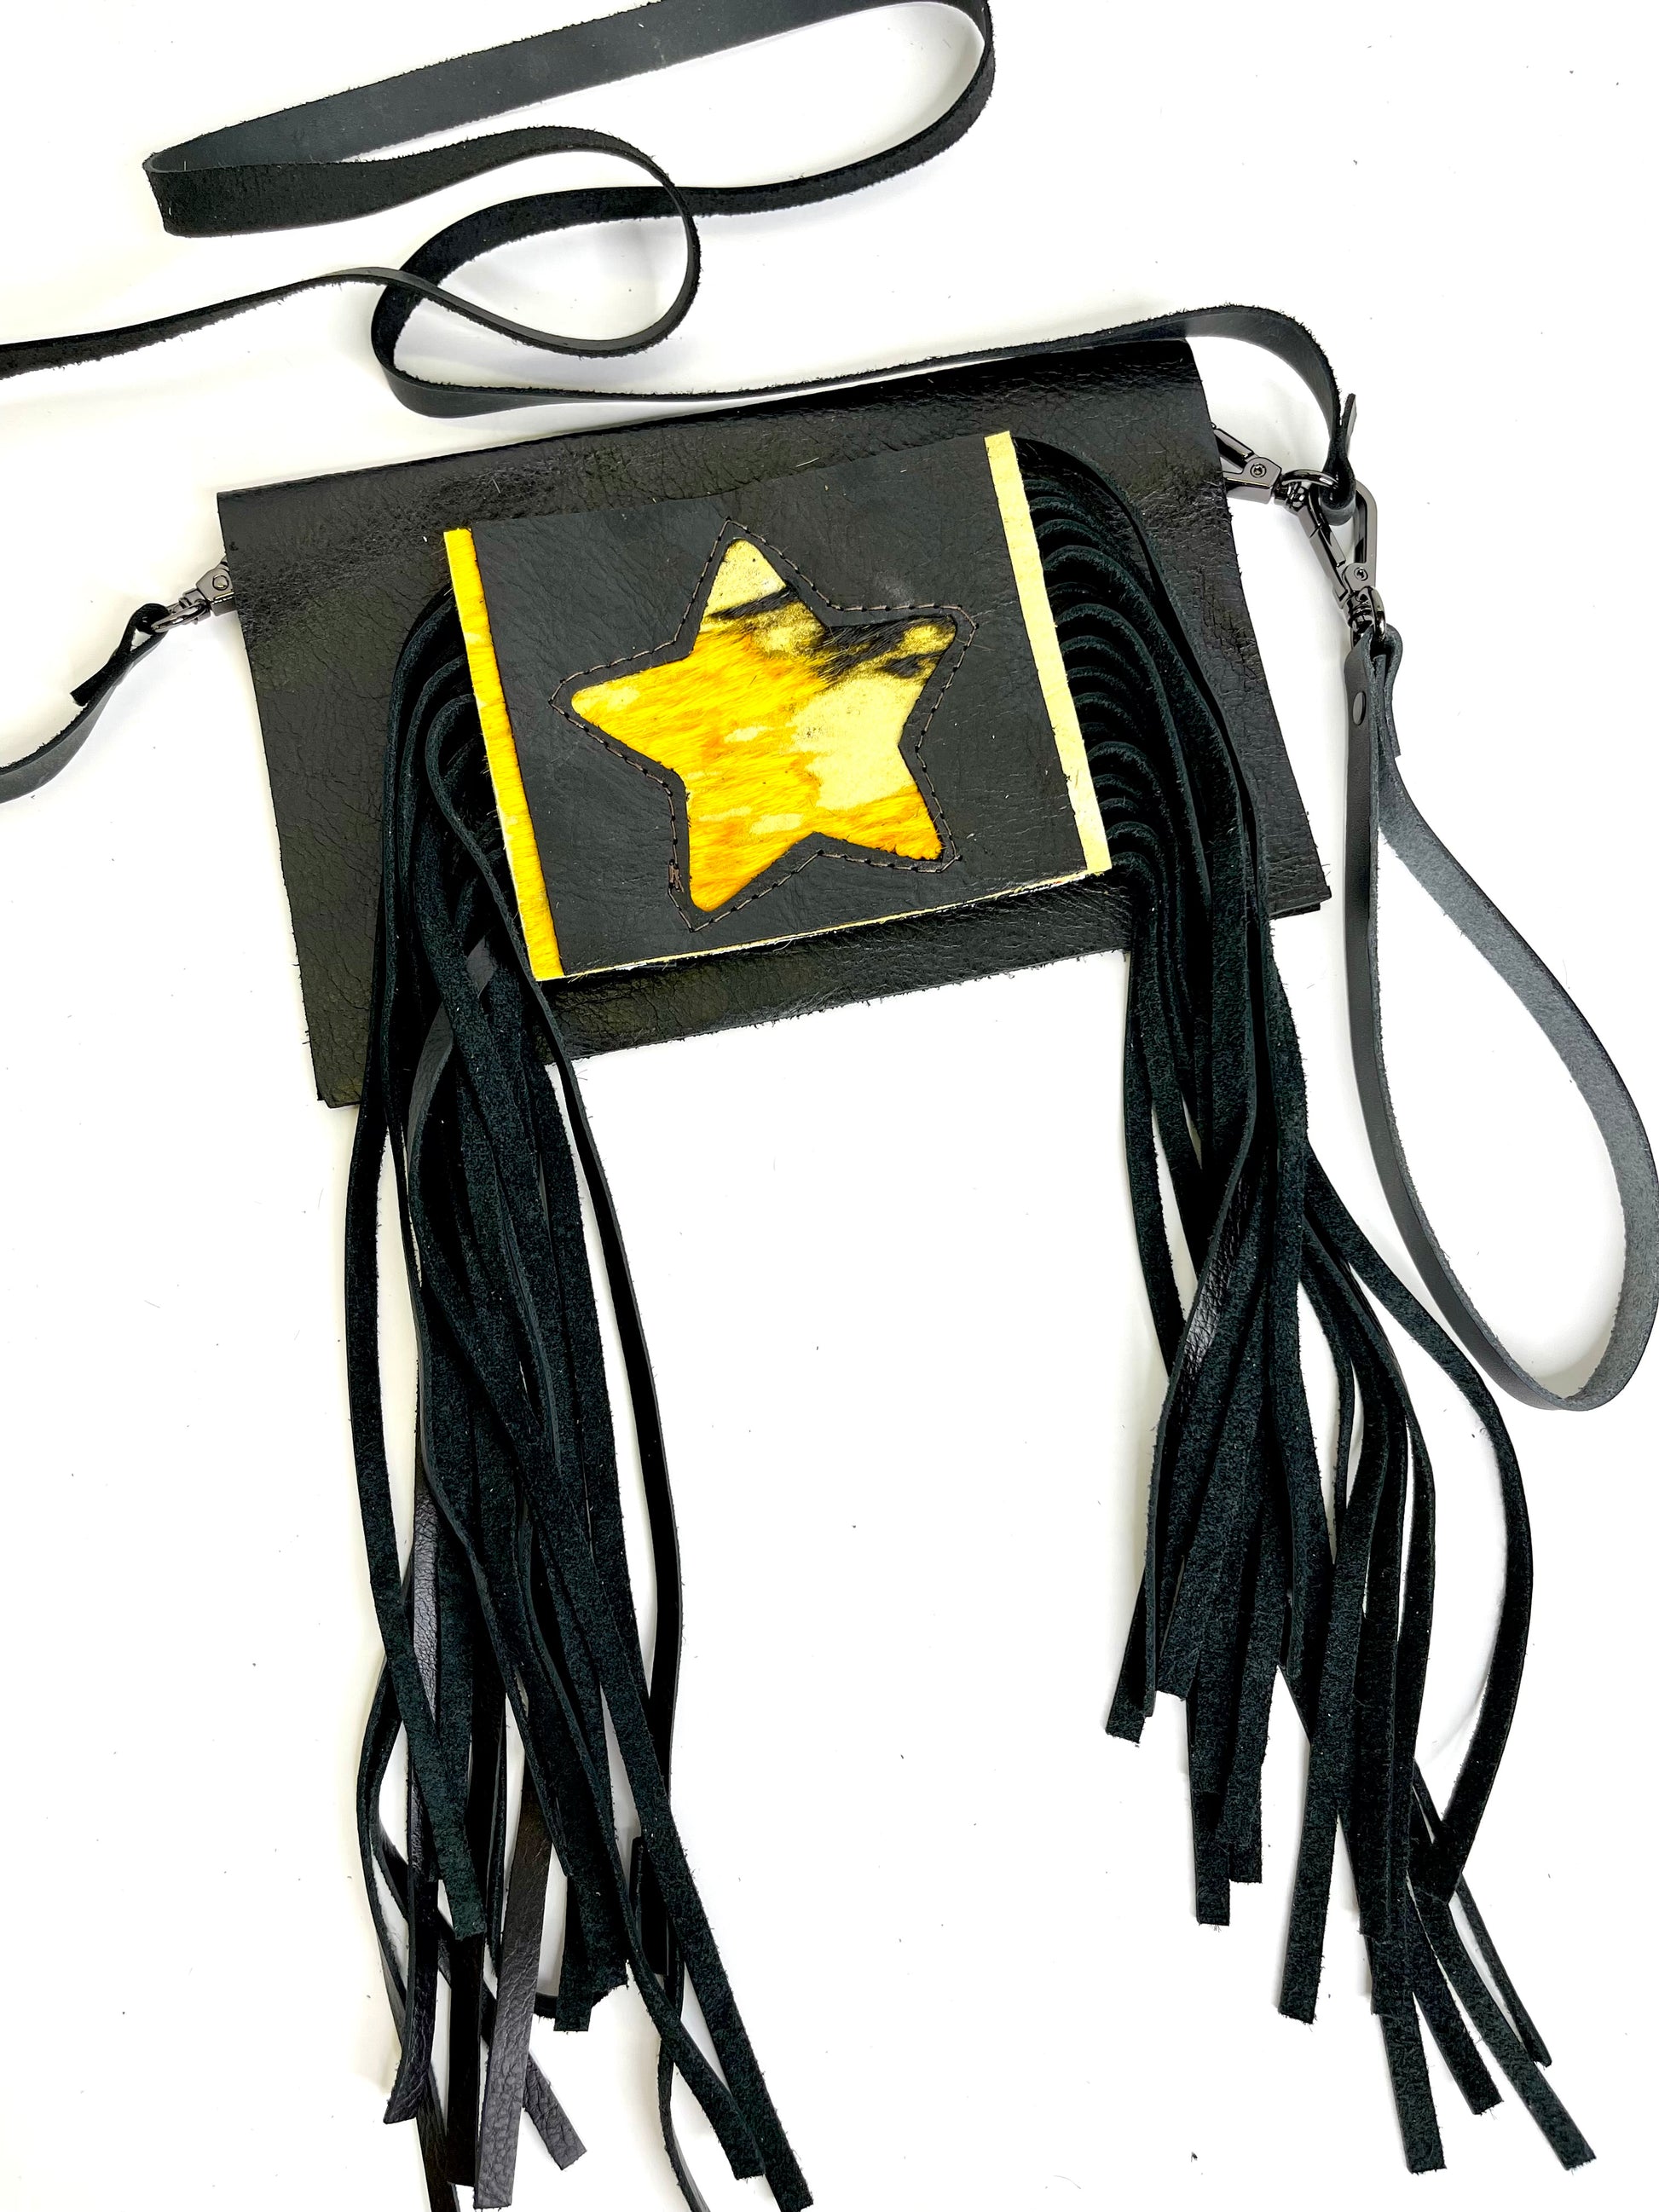 Small Crossbody Star- multiple hide options - Patches Of Upcycling